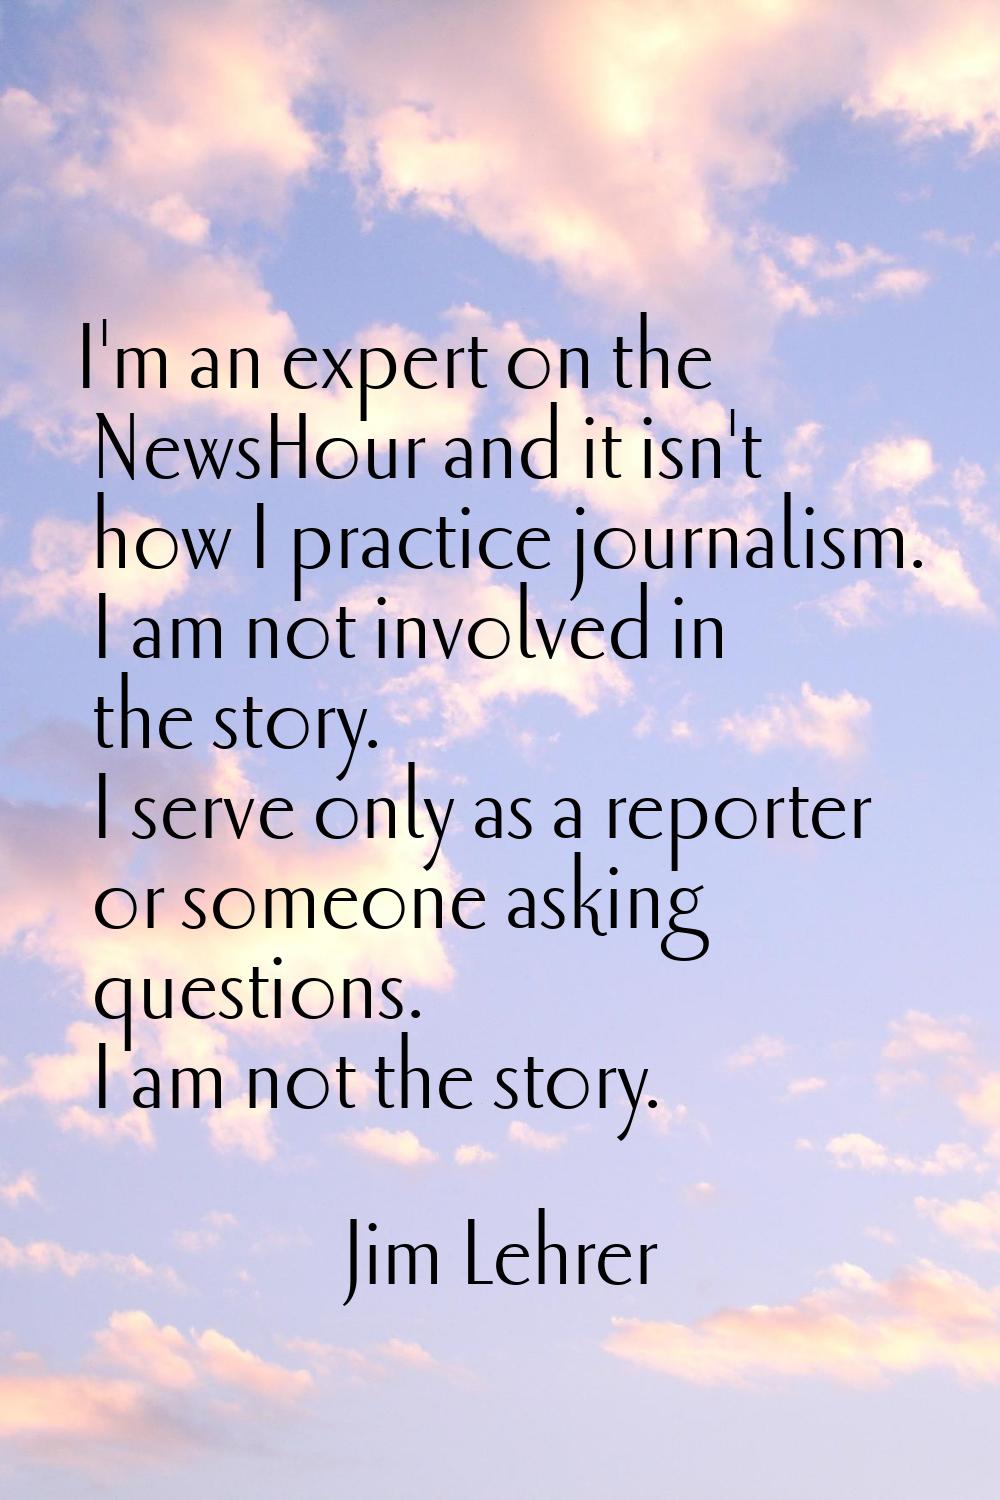 I'm an expert on the NewsHour and it isn't how I practice journalism. I am not involved in the stor